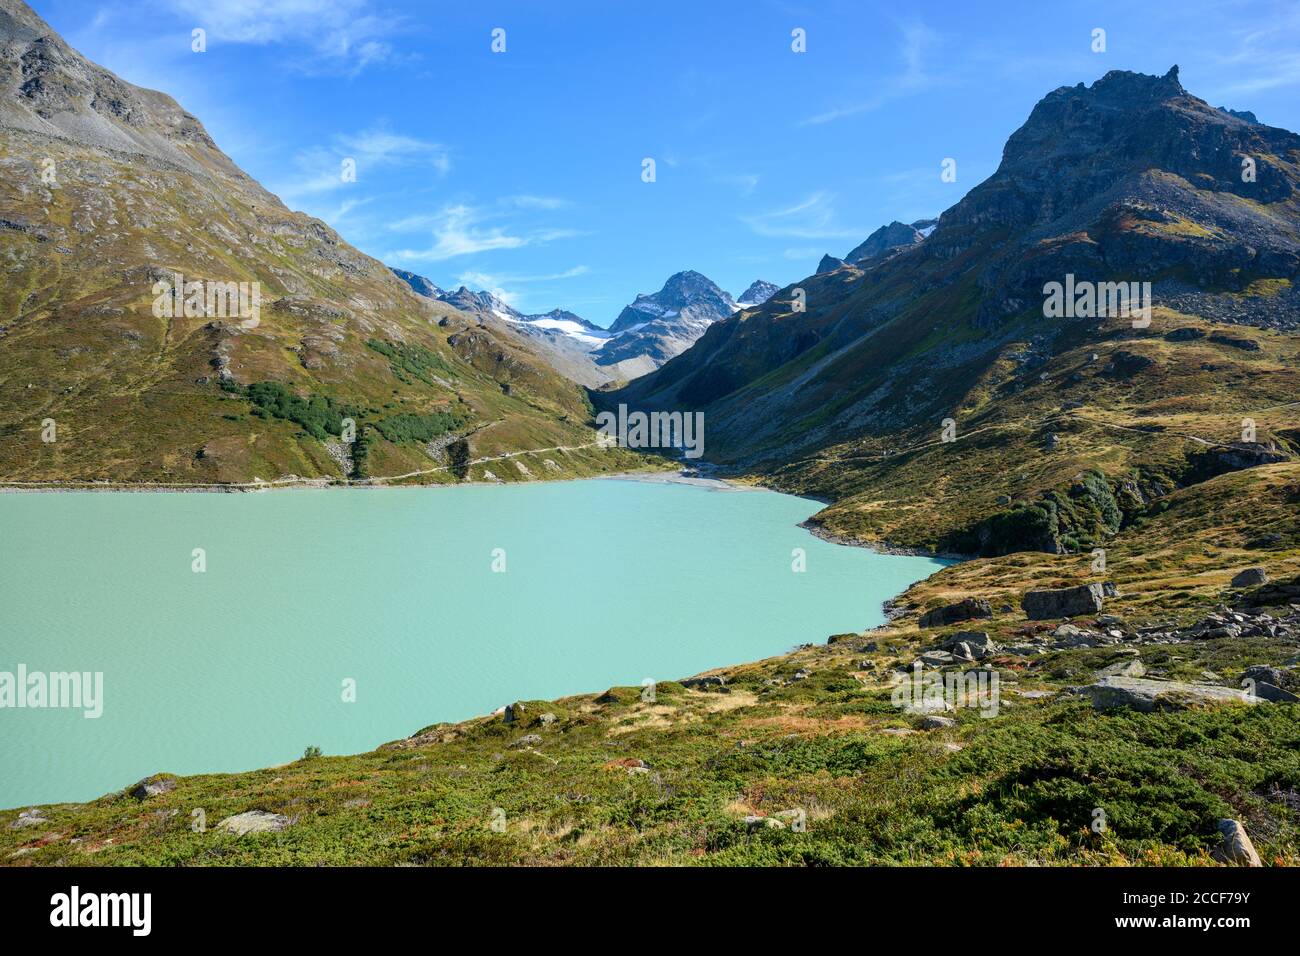 Austria, Montafon, the Silvrettasee, view to Piz Buin, on the right the Kleine Schattenspitze (2703 m). Stock Photo